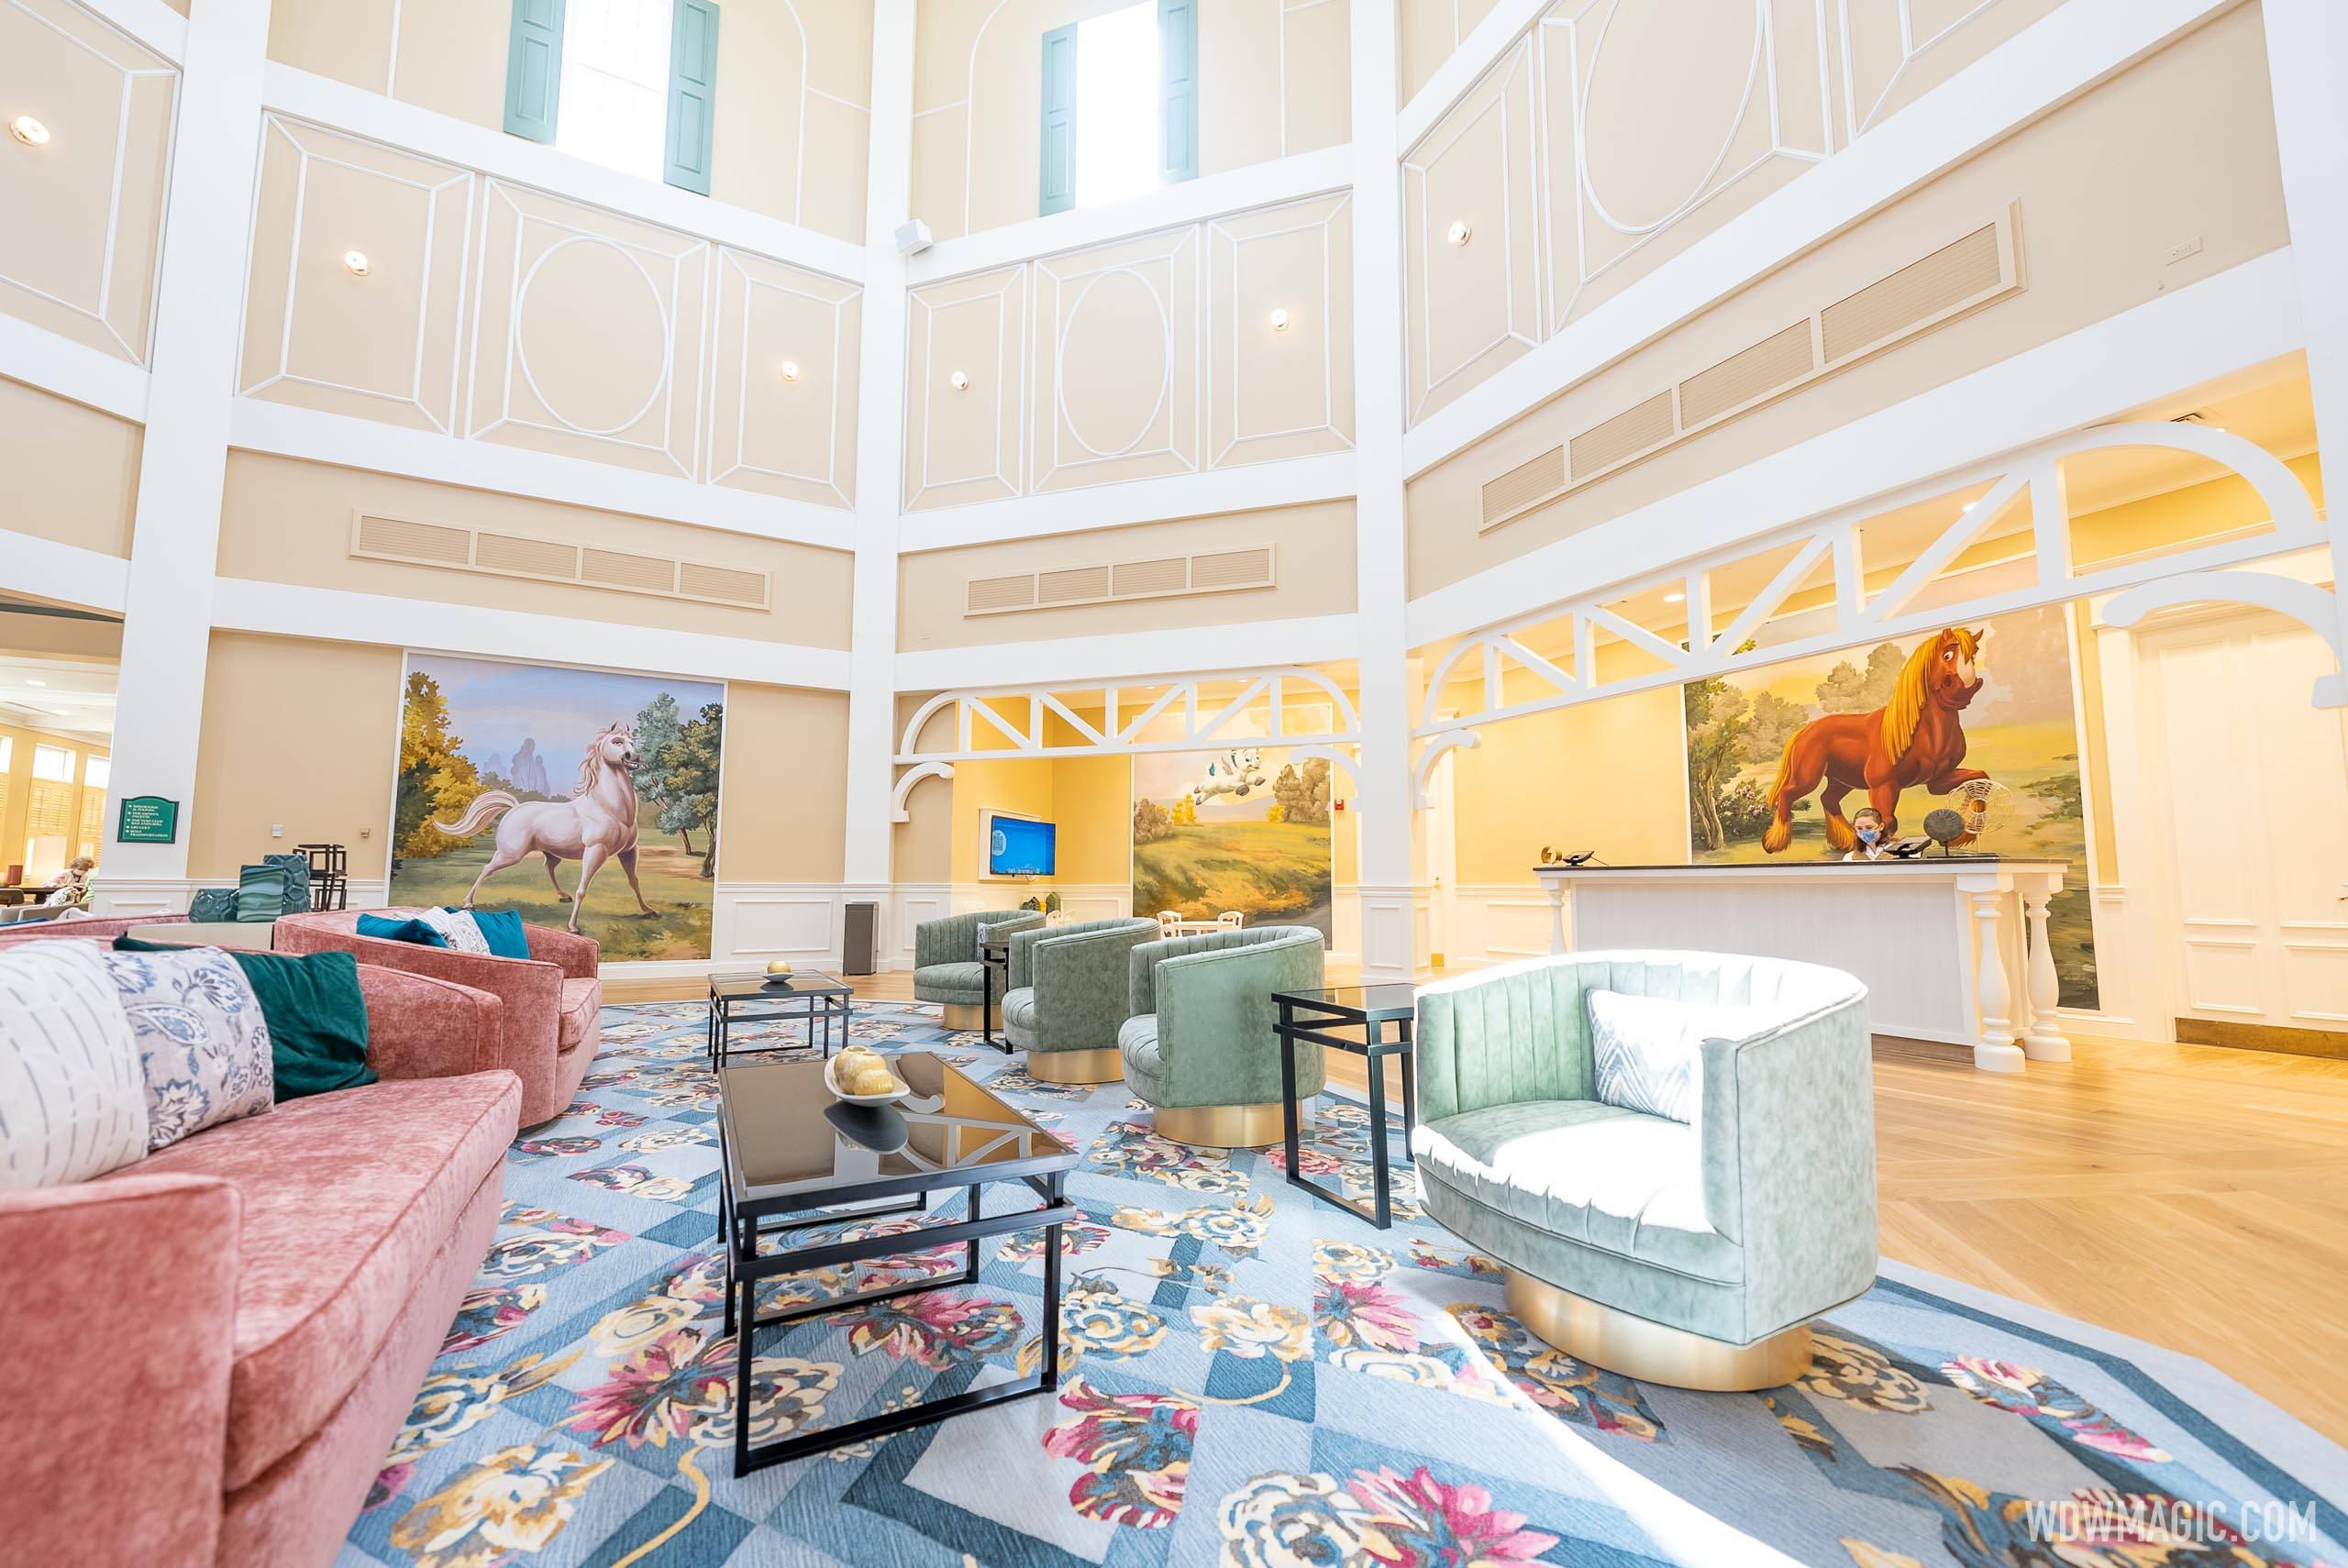 Disney's Saratoga Springs Resort also recently updated its lobby area